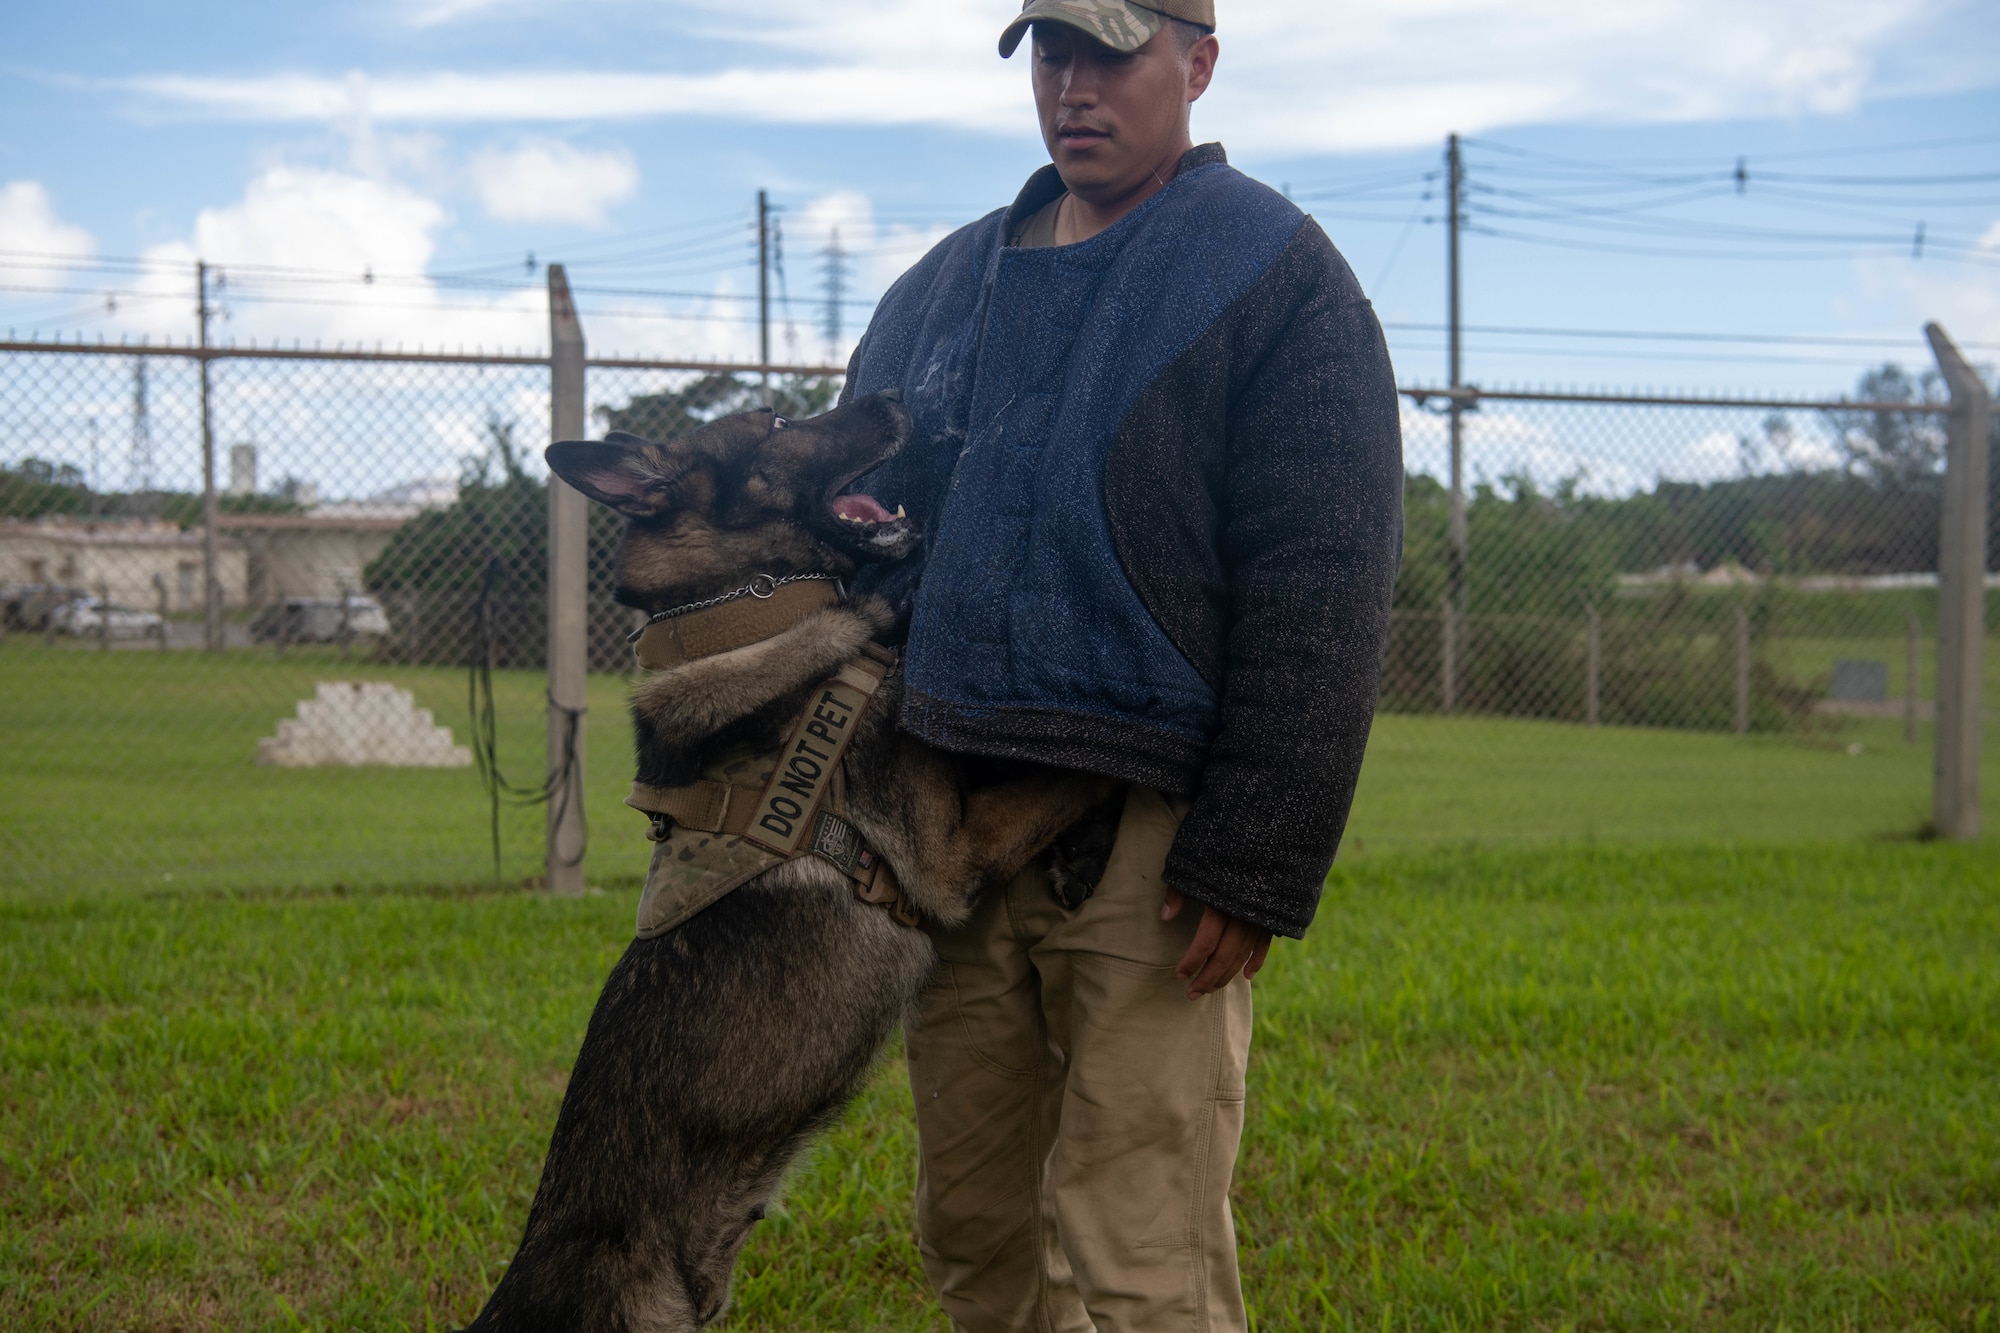 K9 Unit trainer works with dog on controlled bite training